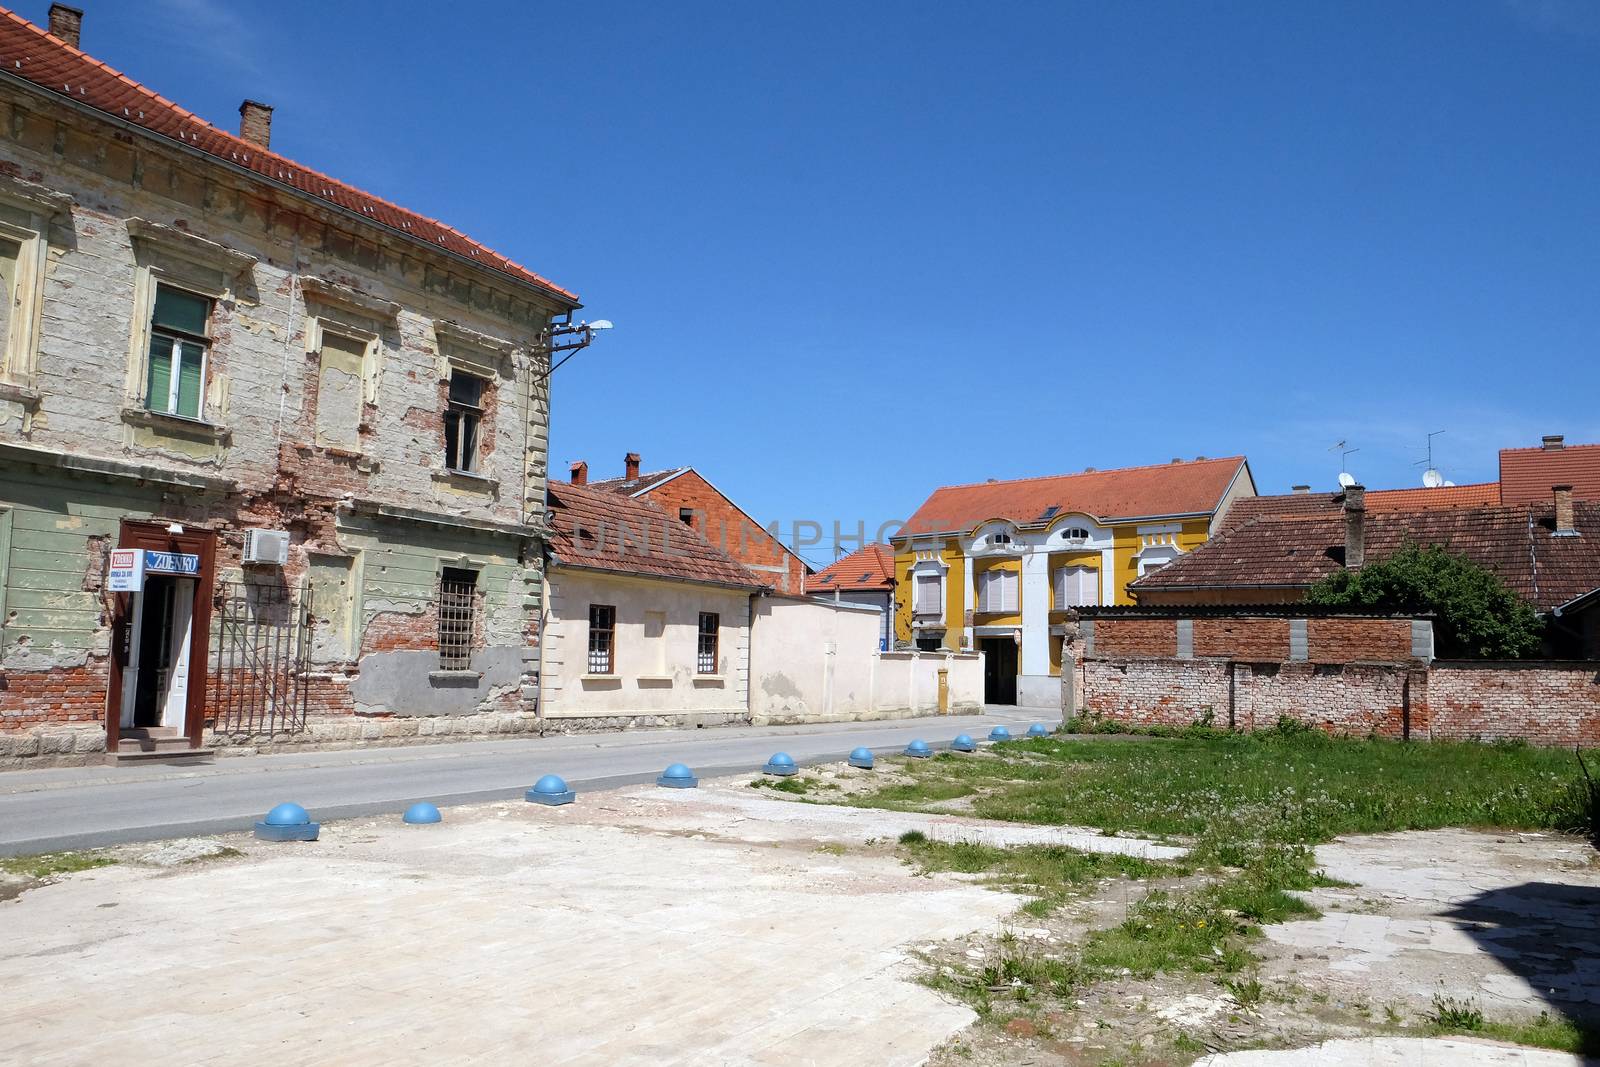 Destroyed house as war aftermath. The Croatian War of Independence was fought from 1991 to 1995 in Pakrac, Croatia by atlas